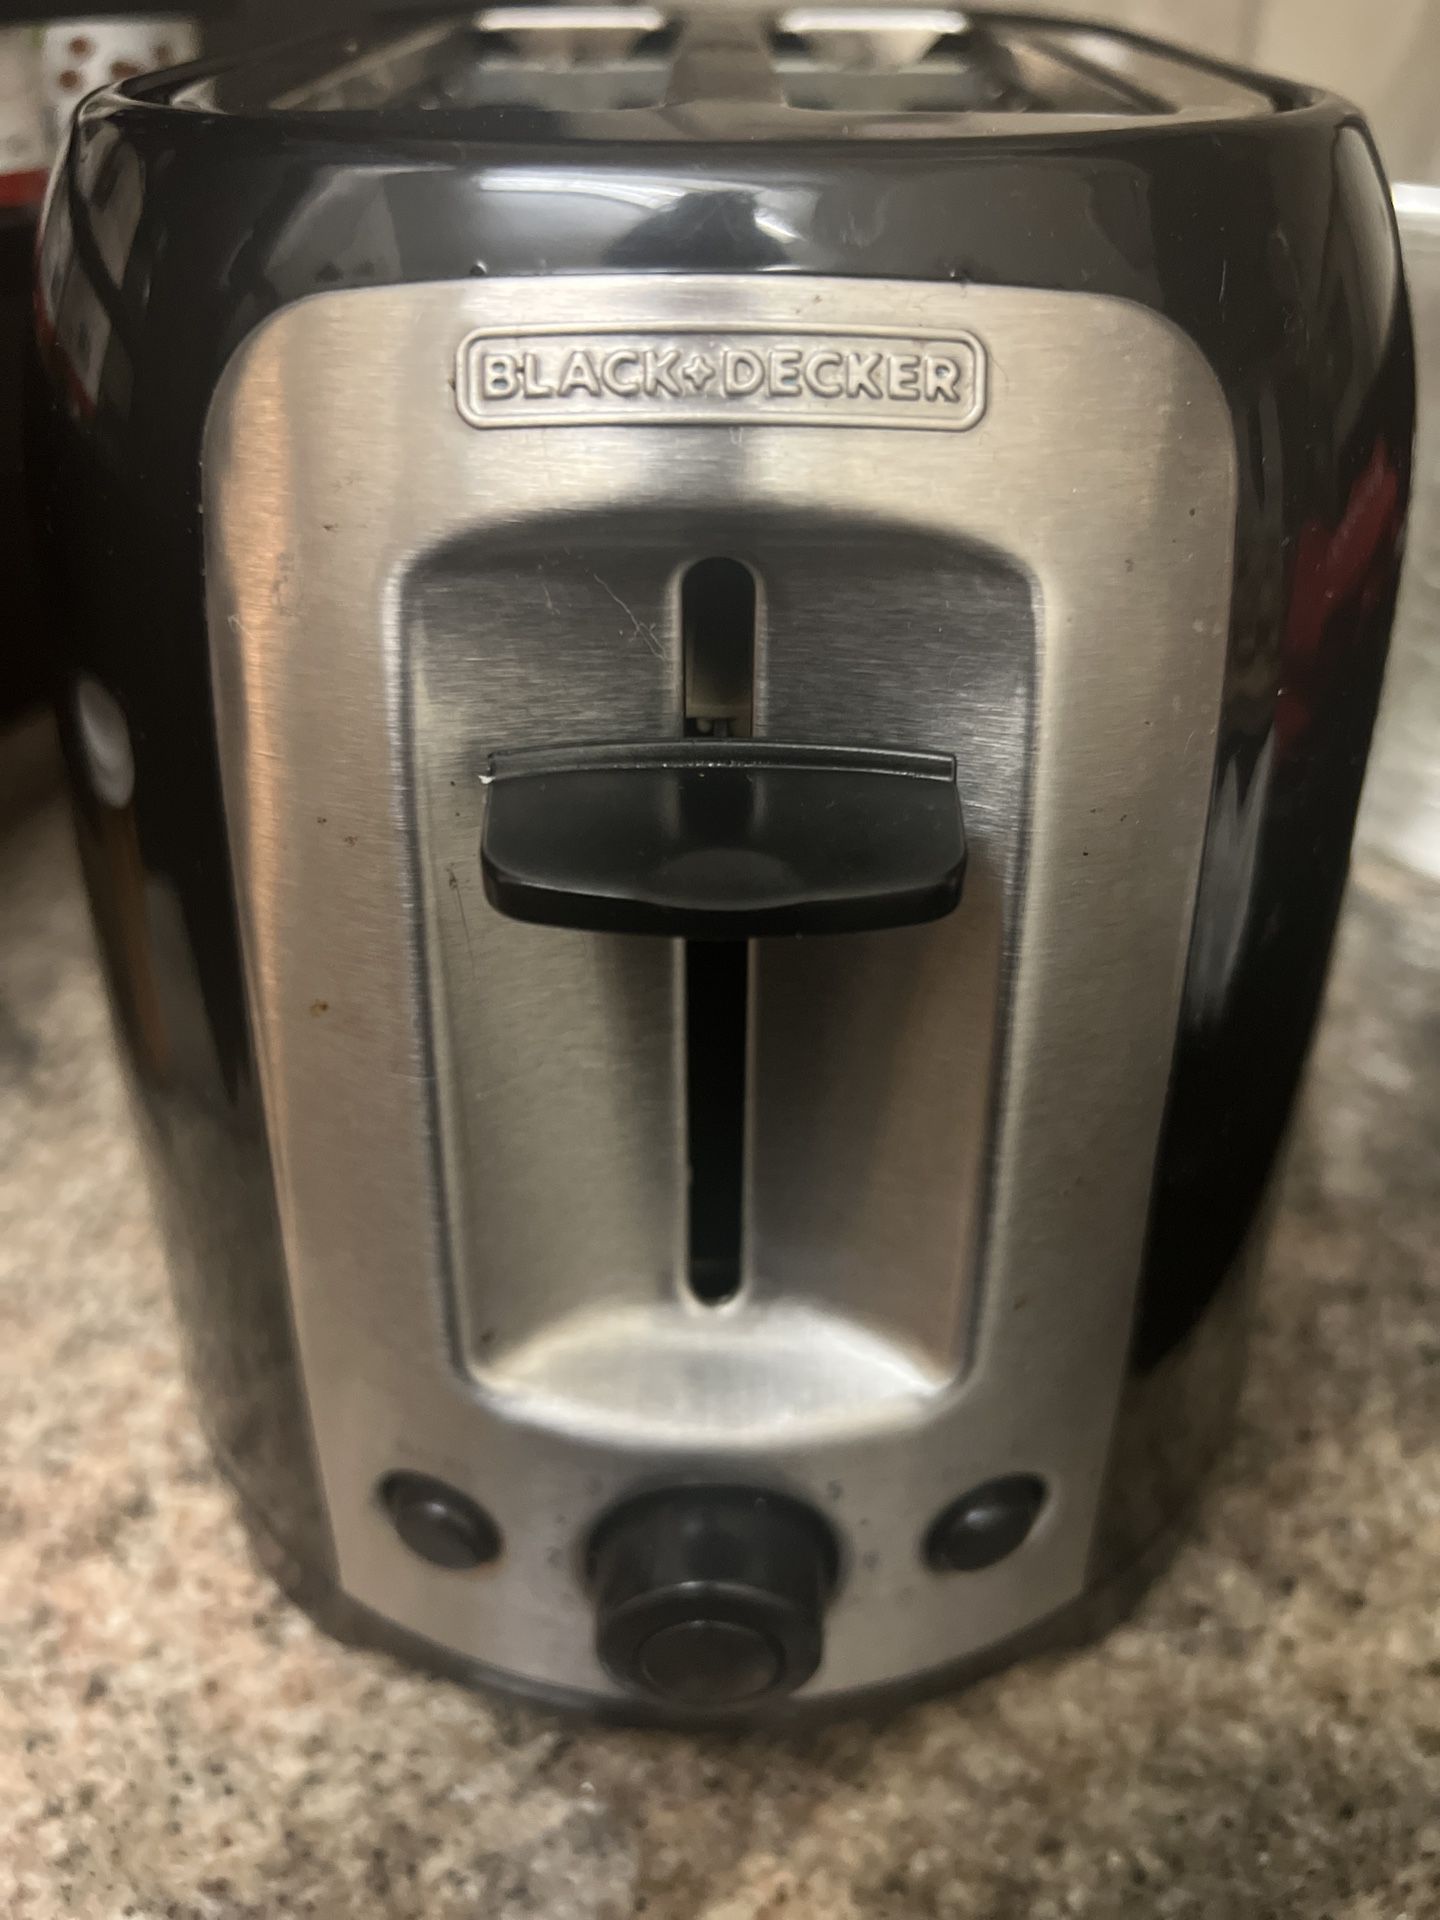 Black And Decked Toaster - Black 